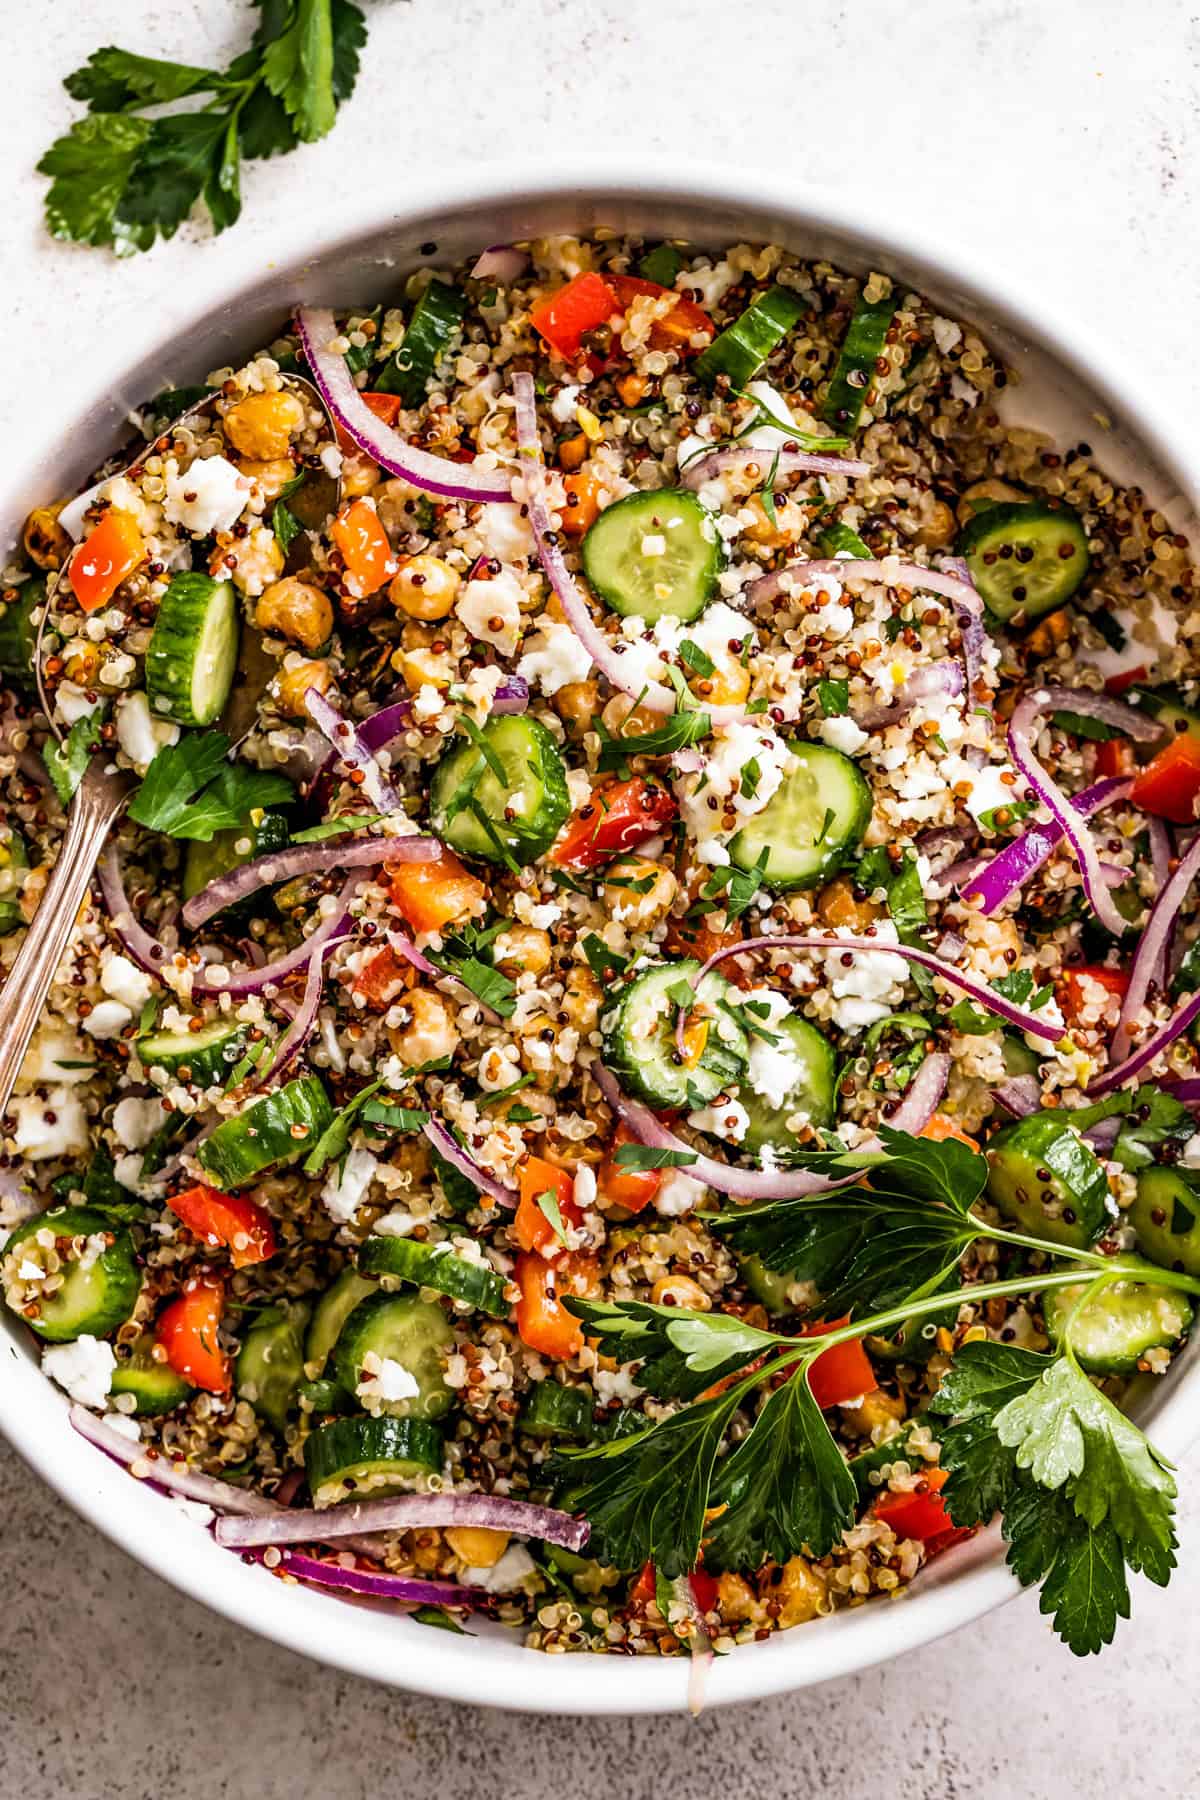 Salad bowl with quinoa, sliced cucumbers, sliced red onions, chickpeas, peppers, and nuts.